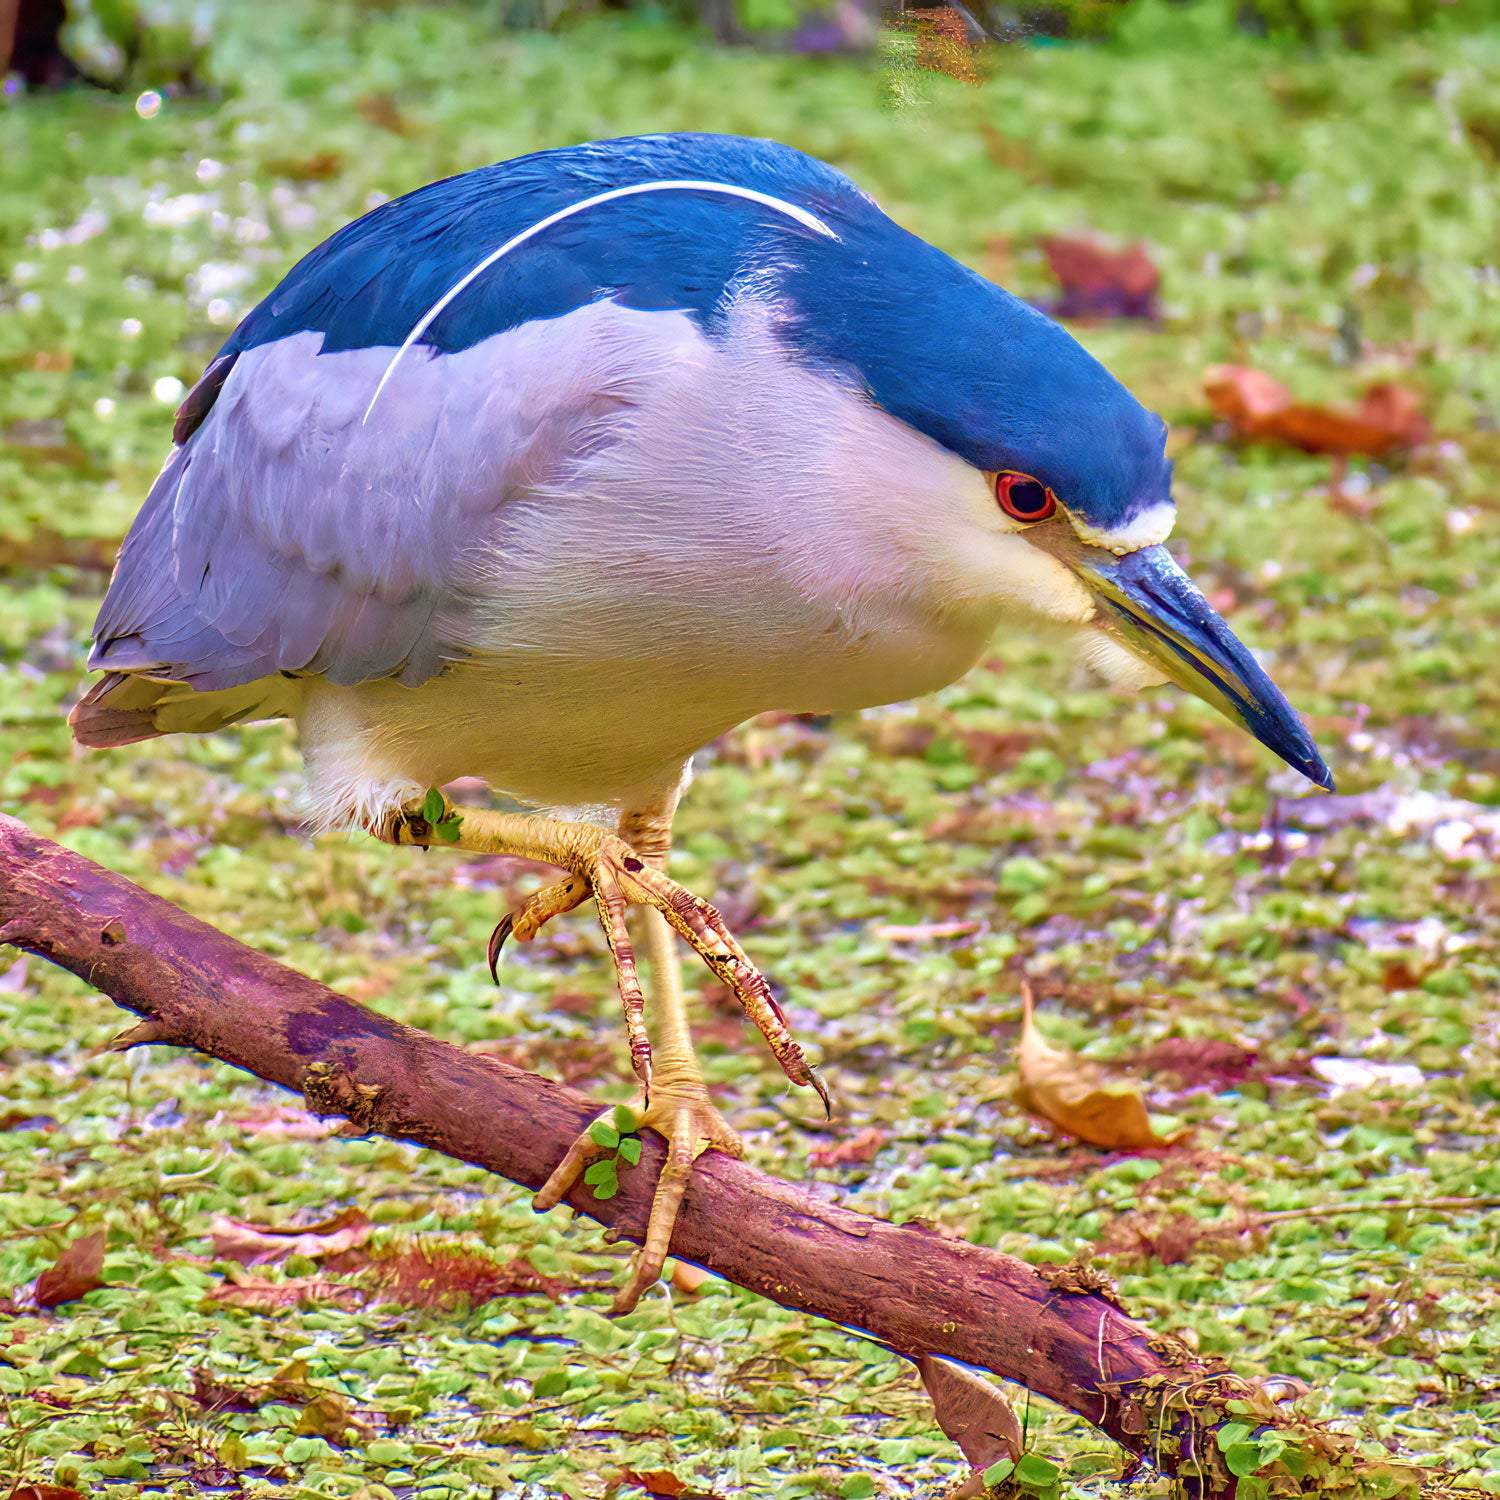 Stealthy Night Heron - Artist by Darin E Hartley Photography - 